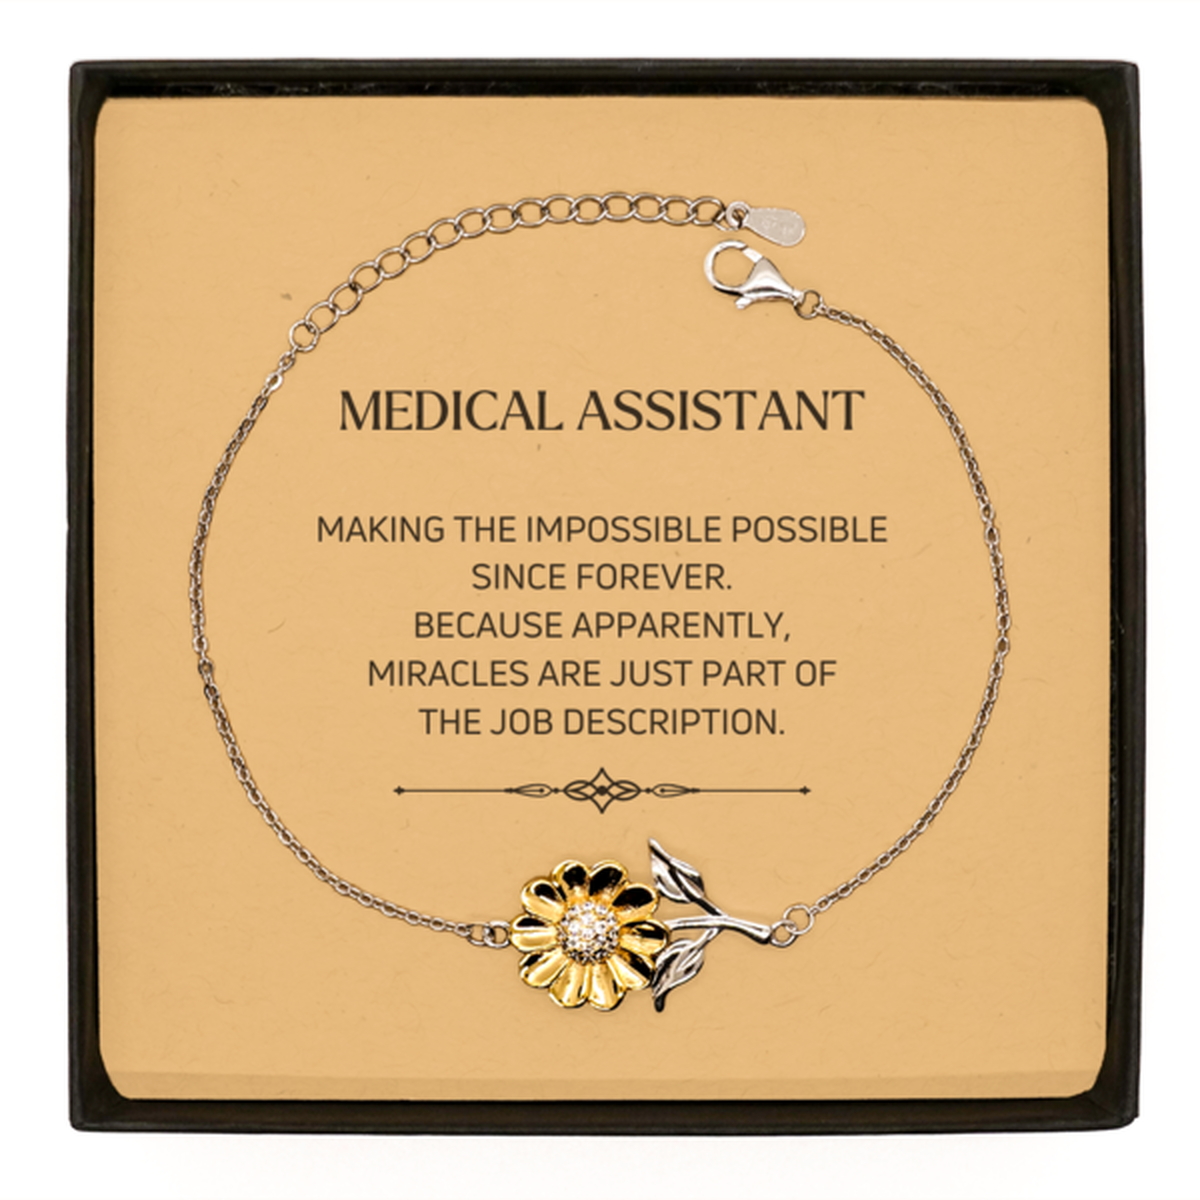 Funny Medical Assistant Gifts, Miracles are just part of the job description, Inspirational Birthday Sunflower Bracelet For Medical Assistant, Men, Women, Coworkers, Friends, Boss